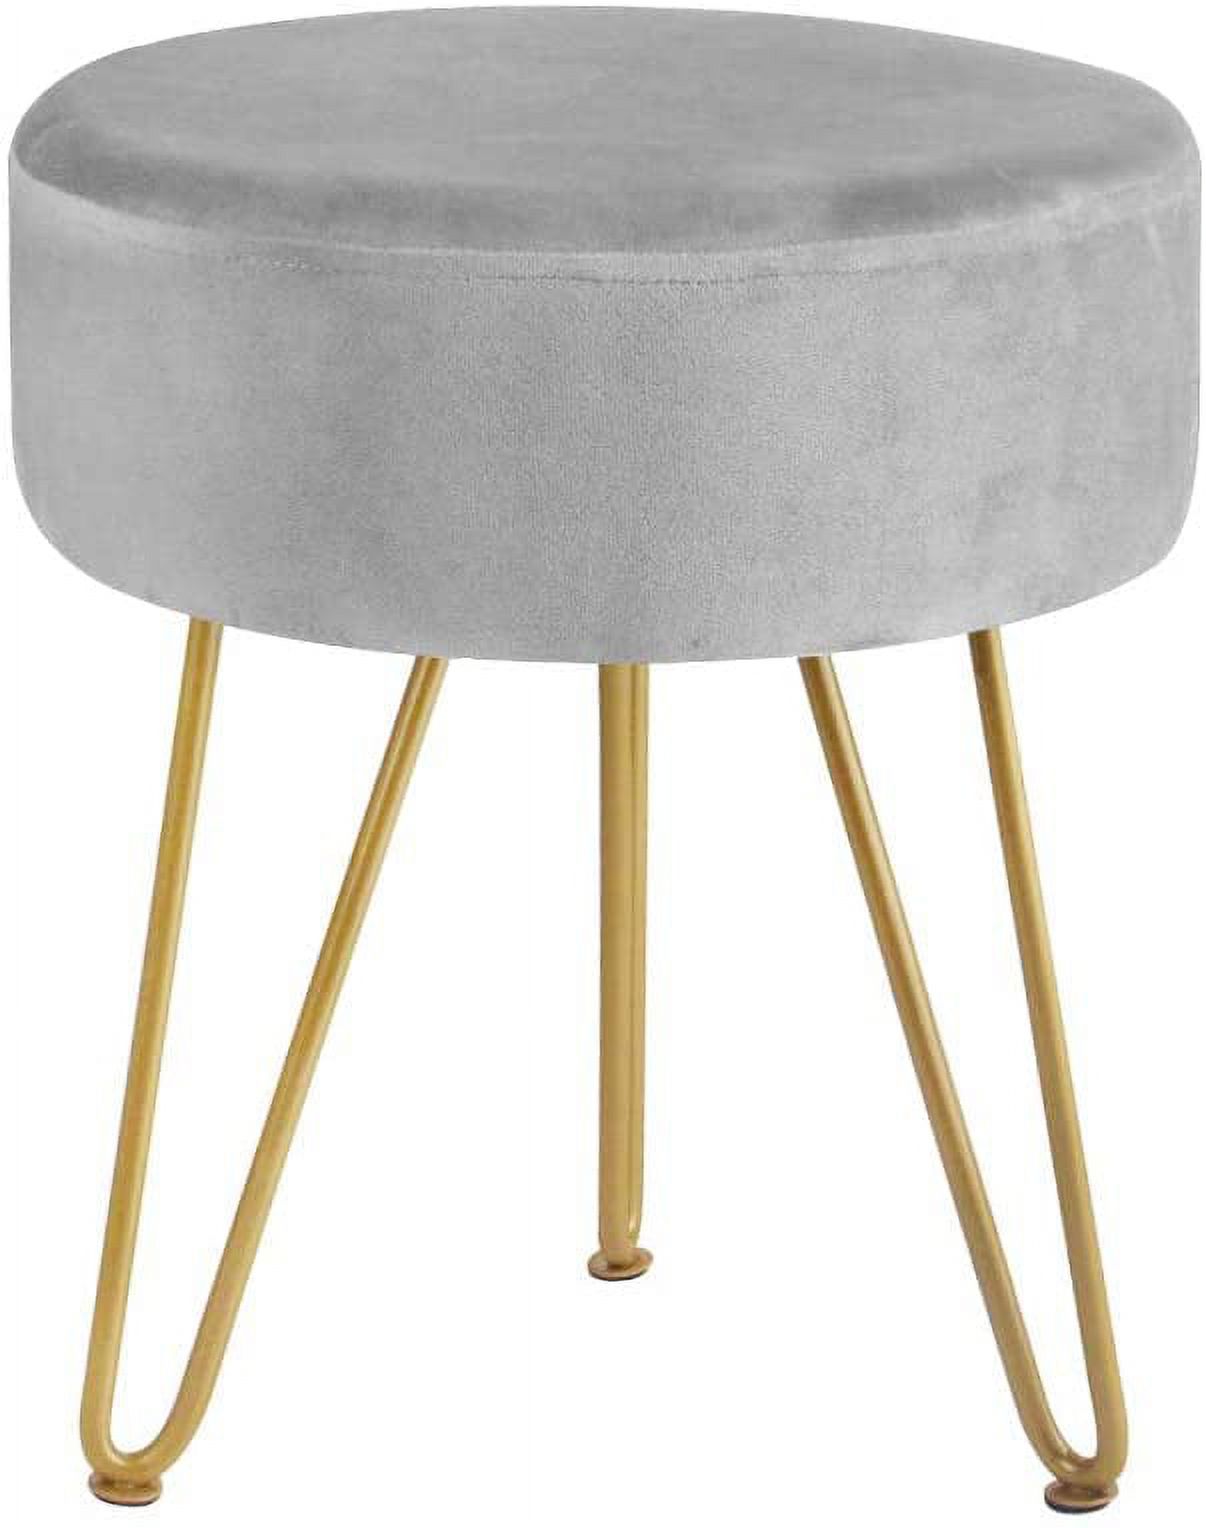 Velvet Footrest Footstool Ottoman Round Modern Upholstered Vanity Foot Stool Side Table Seat Dressing Chair with Golden Metal Leg Grey - image 1 of 10